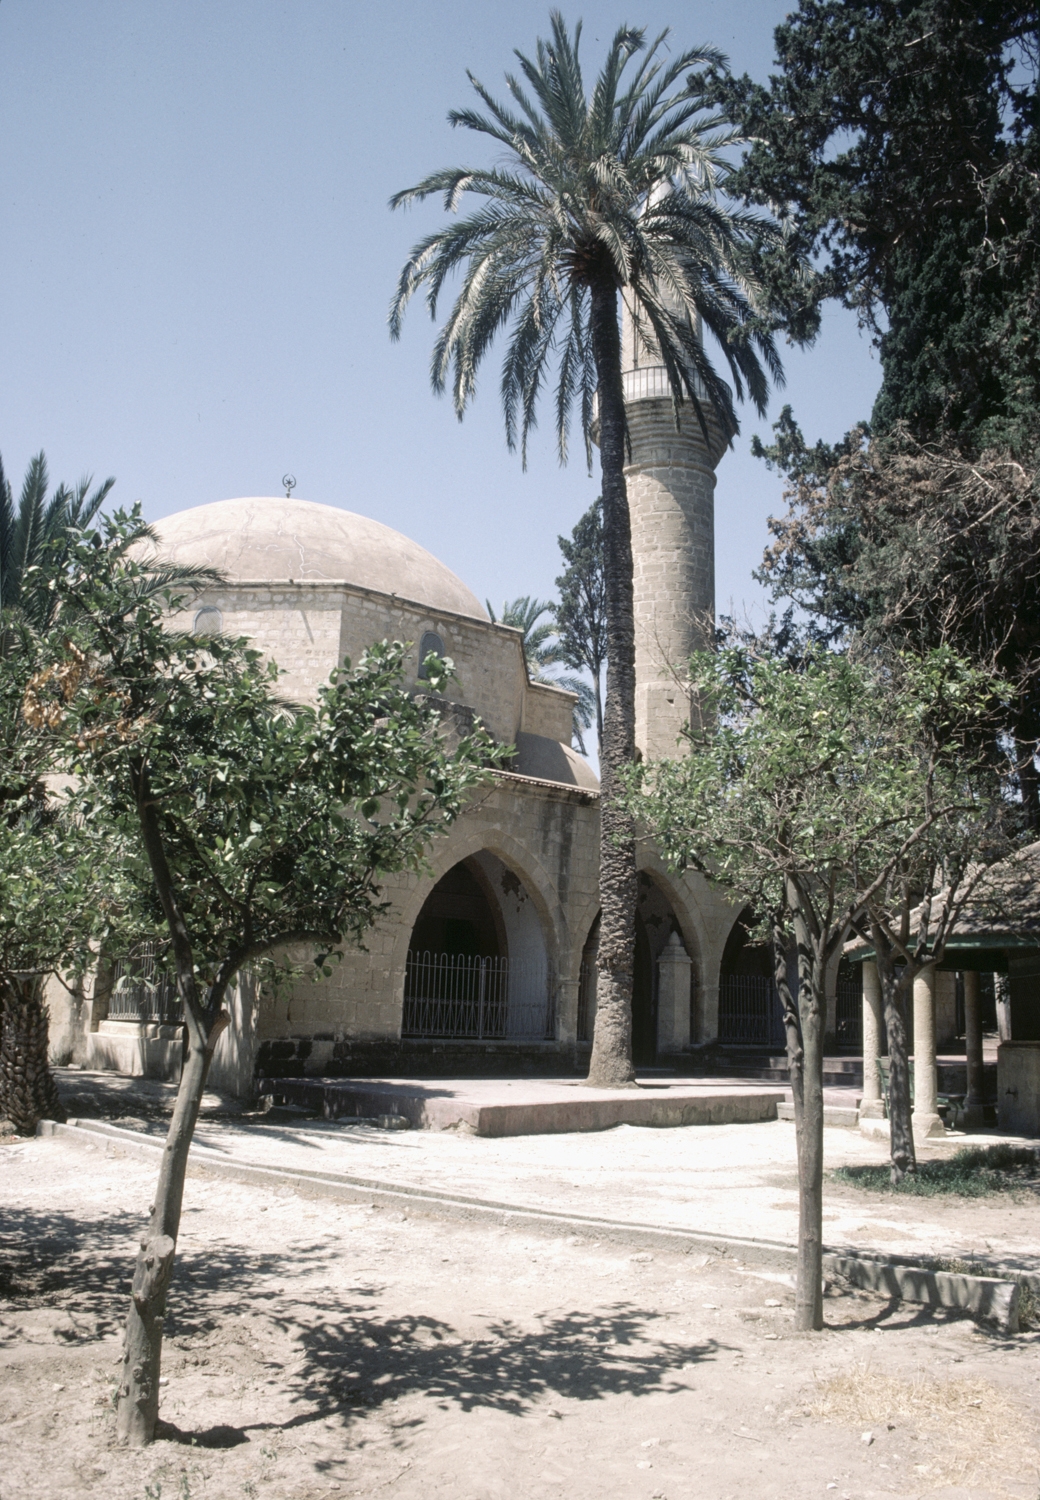 East side of mosque, with minaret